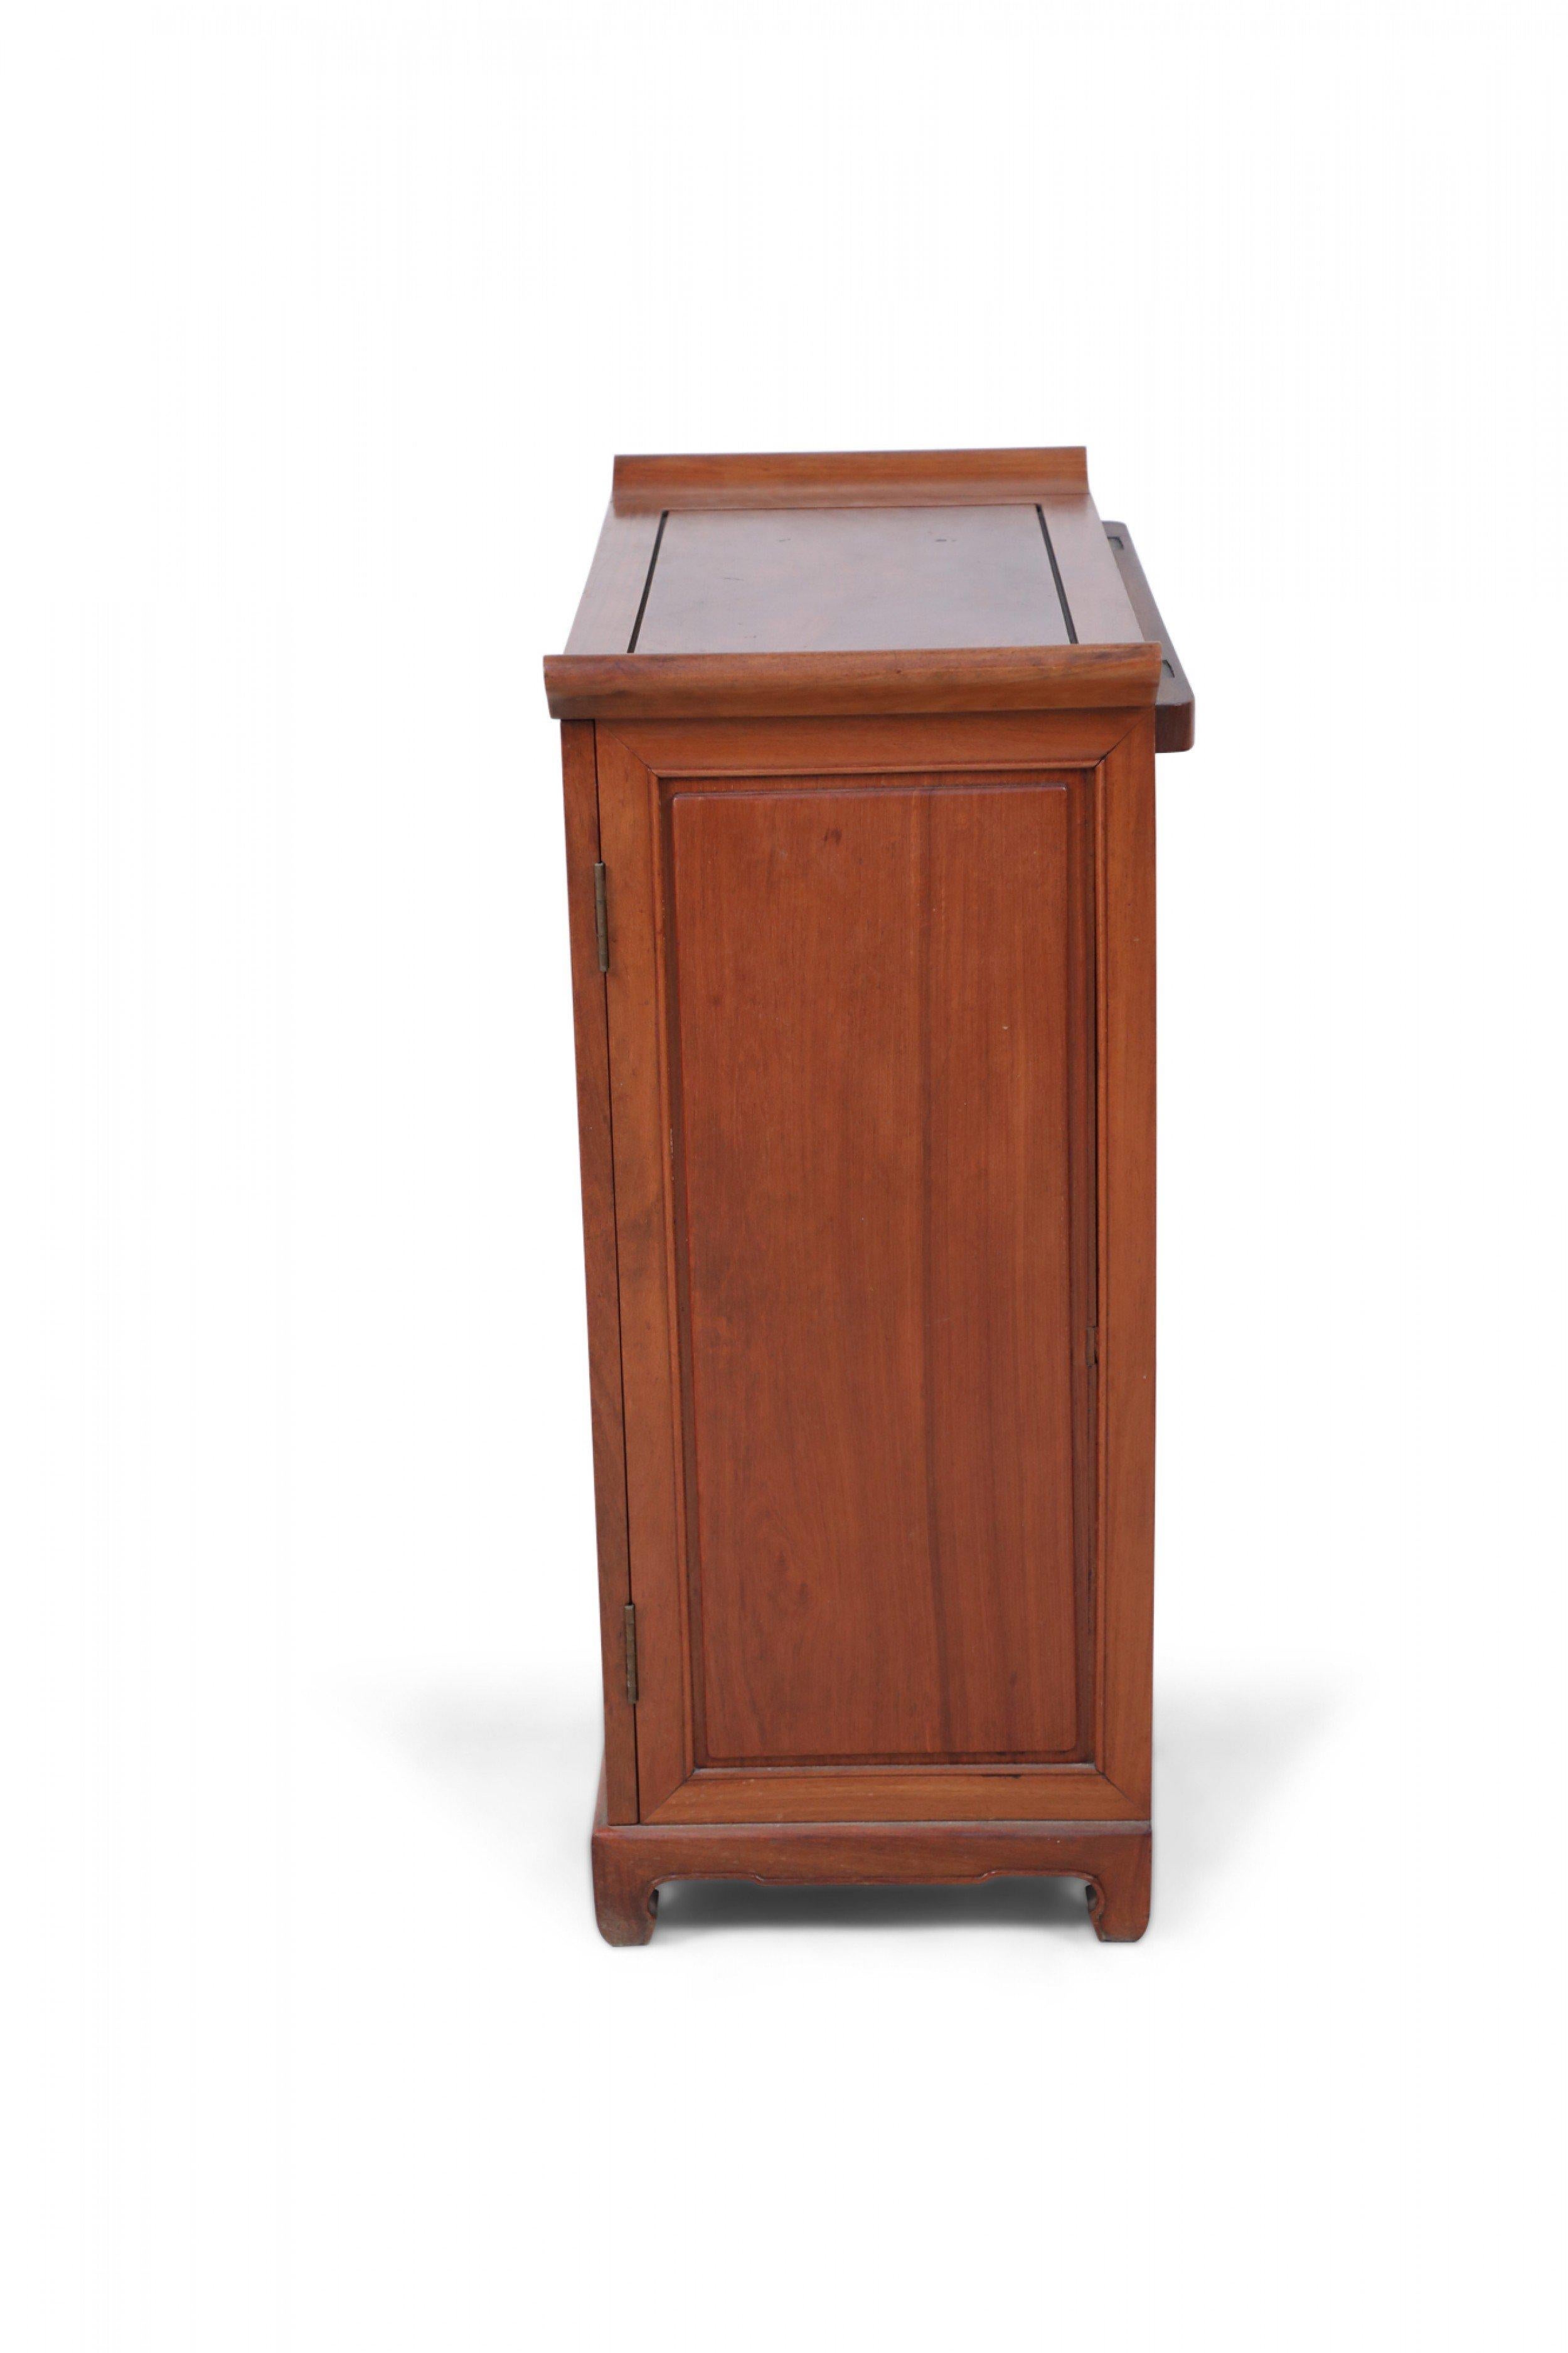 Antique Chinese hardwood bar cabinet with a paneled exterior and brass-hinged top and doors that open to reveal ample storage for glassware, slide-out bottle trays, two drawers and Shou character carvings that symbolize longevity.